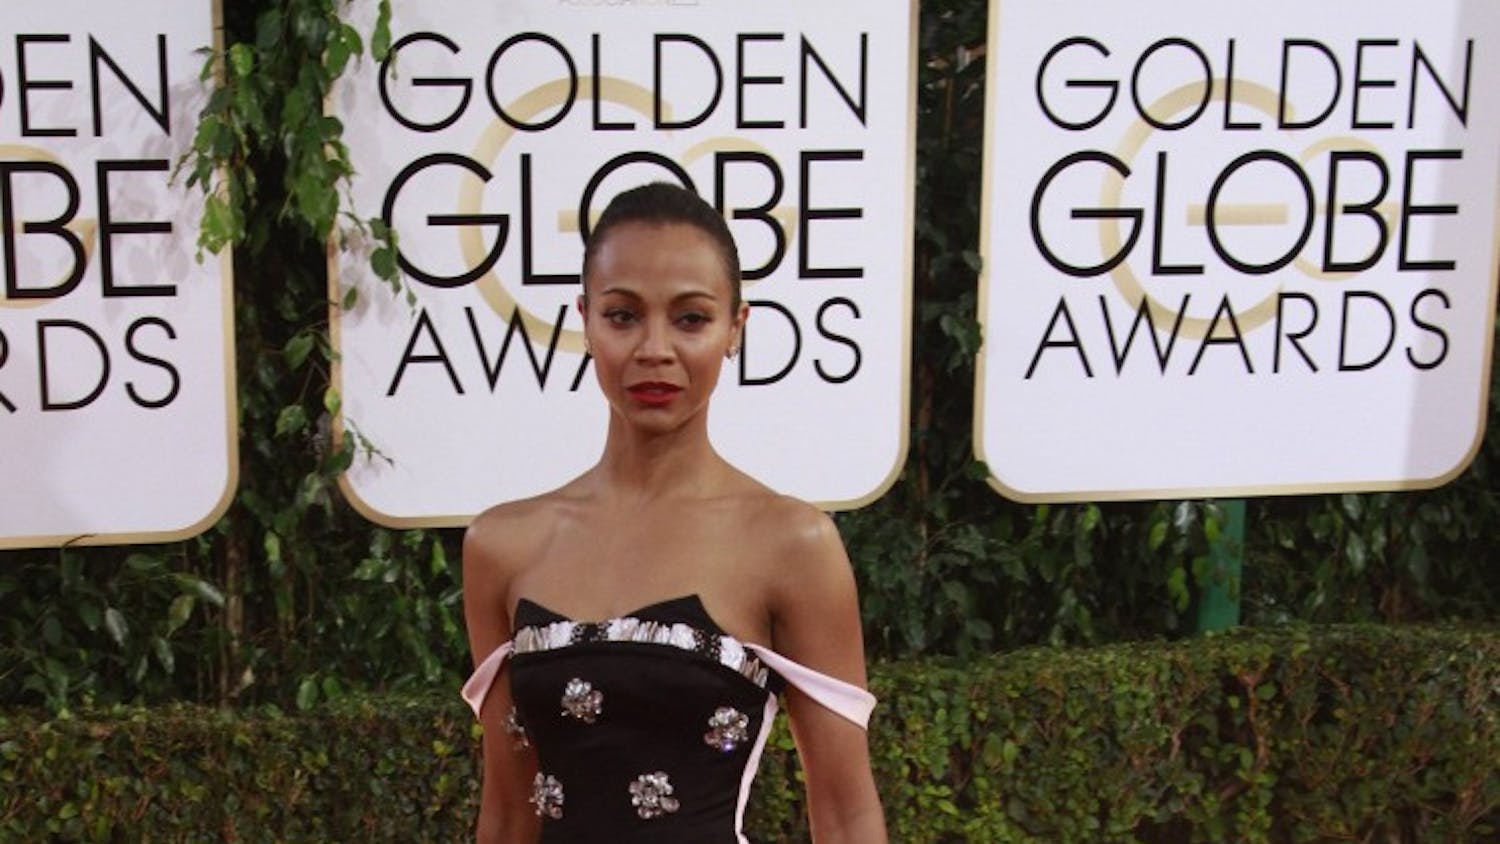 Zoe Saldana arrives for the 71st Annual Golden Globe Awards show at the Beverly Hilton Hotel on Sunday, Jan. 12, 2014, in Beverly Hills, Calif. (Kirk McKoy/Los Angeles Times/MCT)